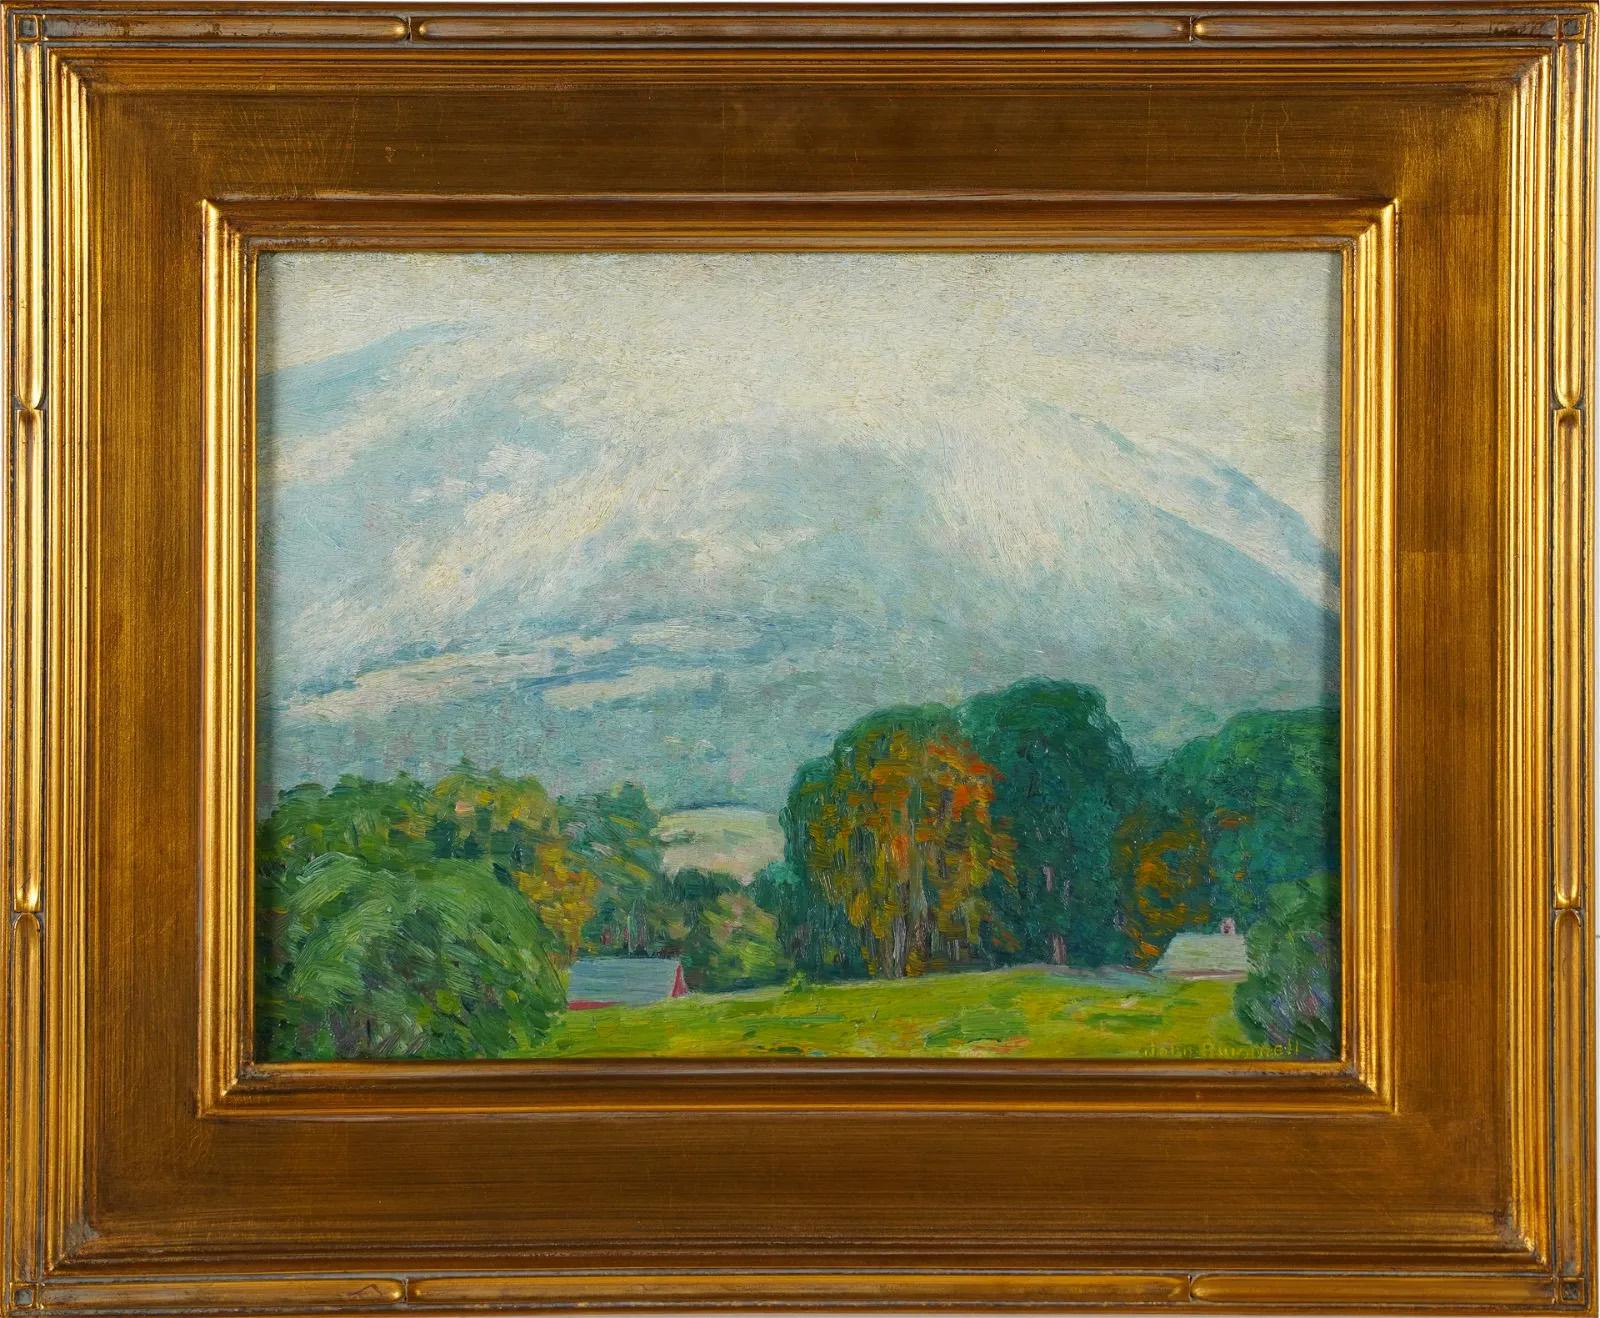 Nicely painted American impressionist landscape painting by John Rummell (1861 - 1942).  Oil on board.  Framed. Signed.